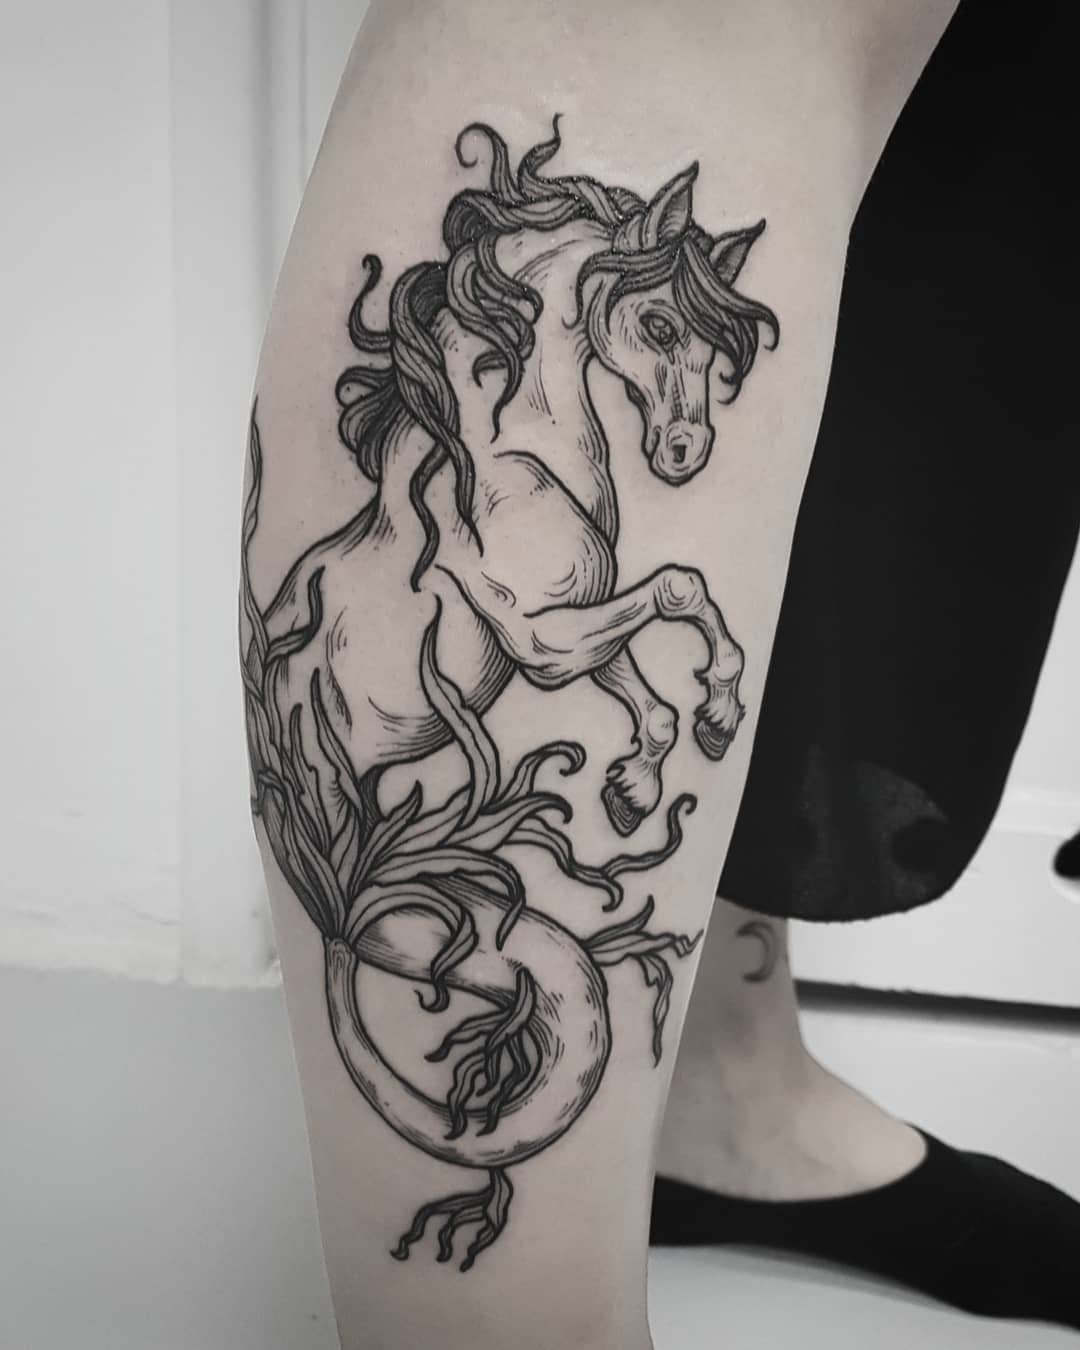 A hippocampus makes for a unique and stunning tattoo.